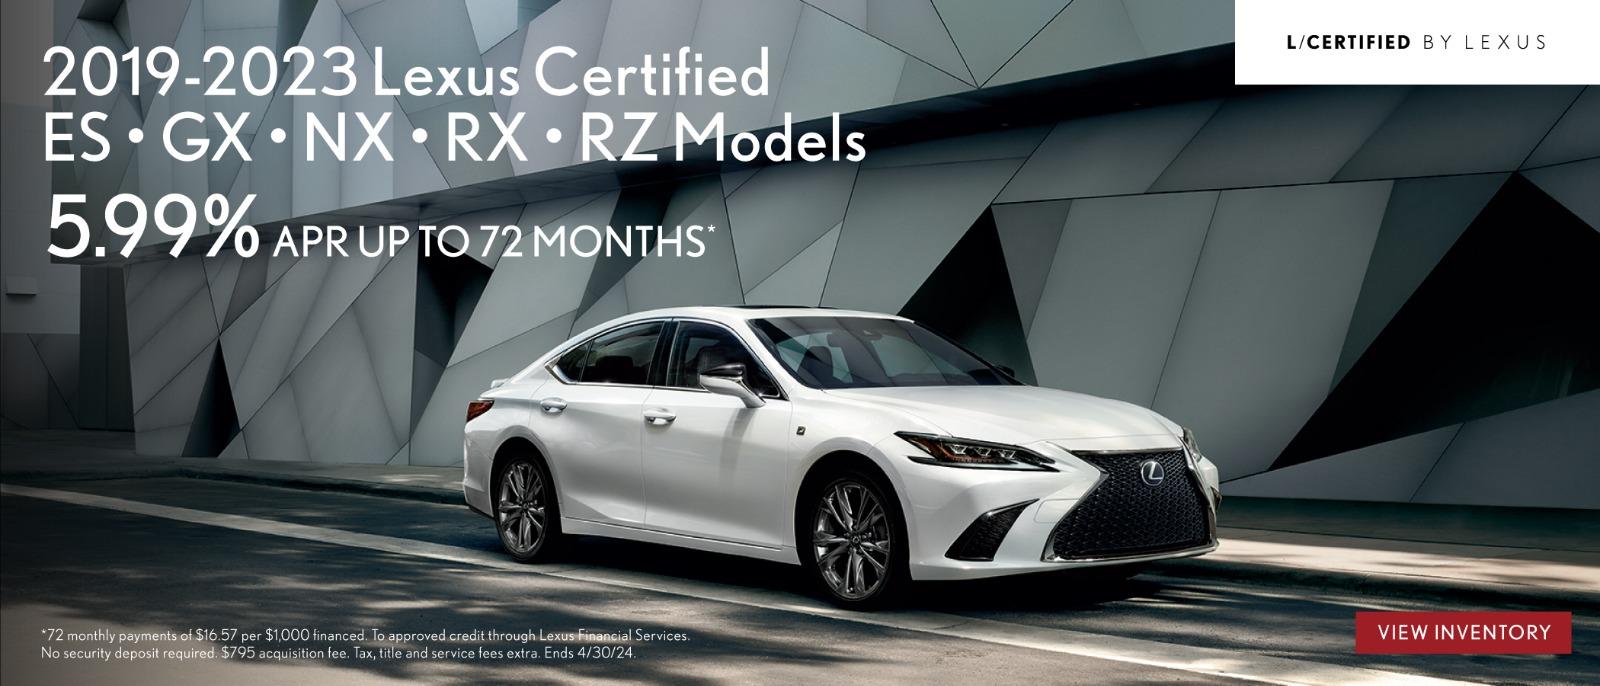 2019-2023 Lexus certified 599% APR up to 60 months*